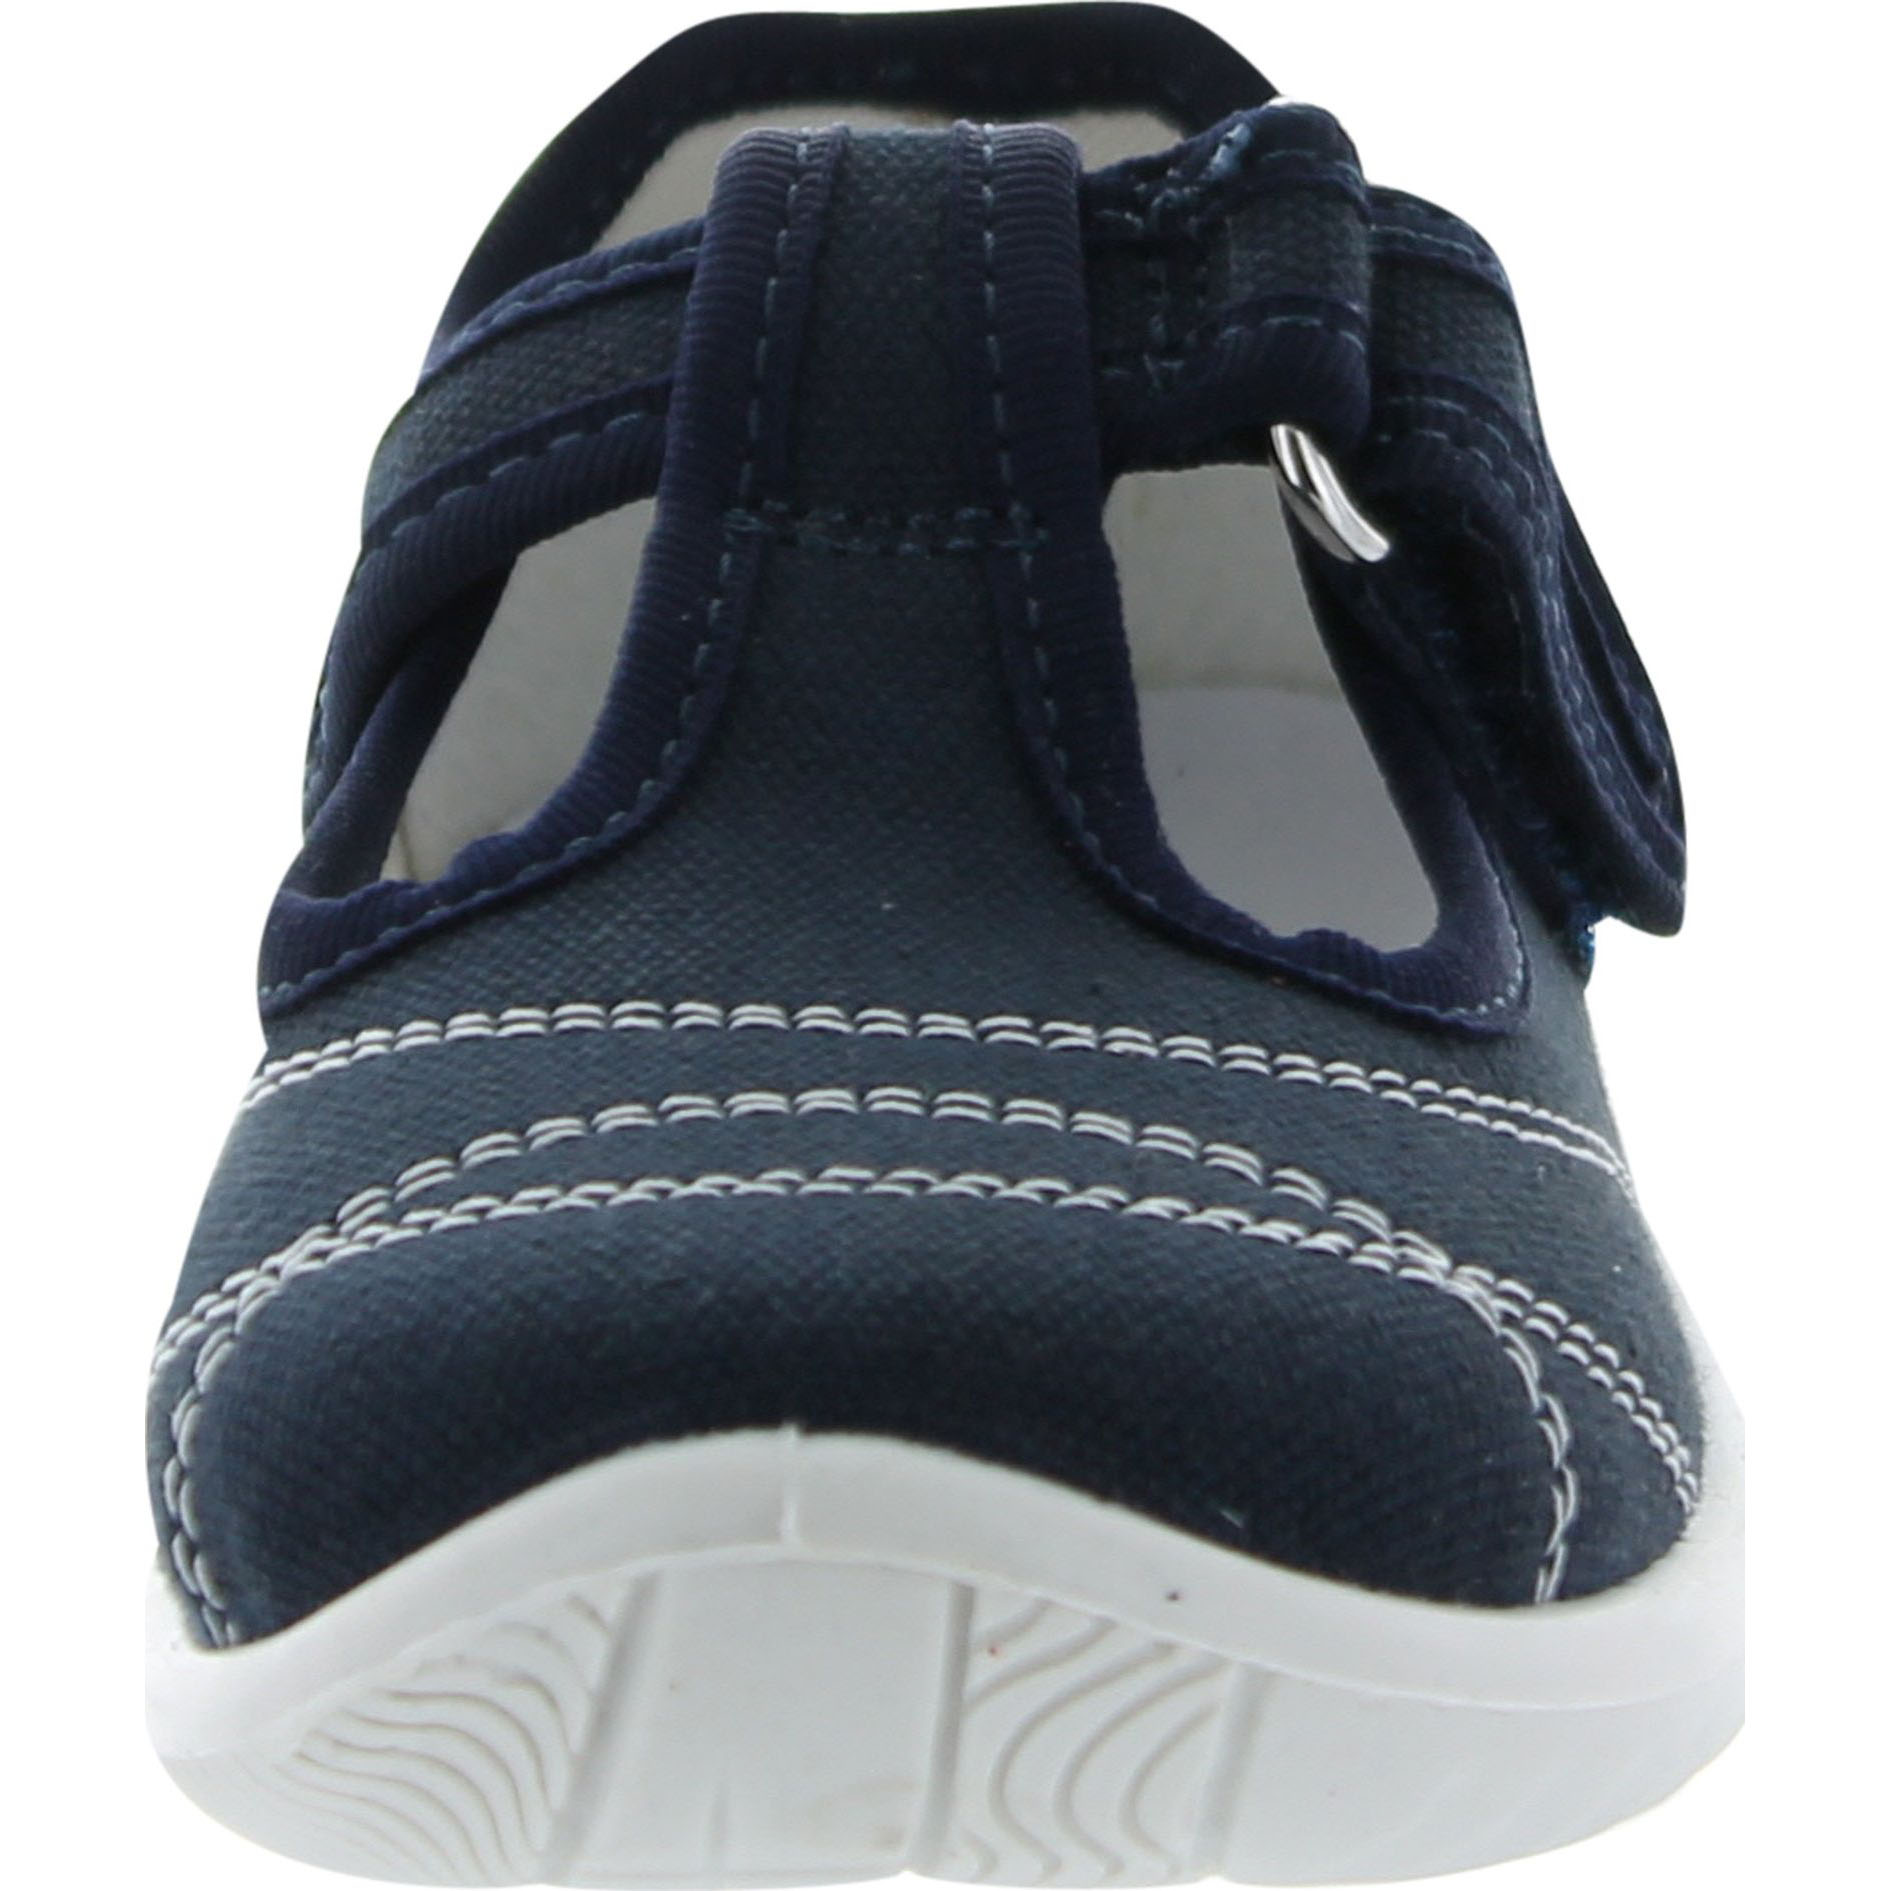 Naturino Boys 7742 Canvas T Strap Casual Shoes - image 3 of 4